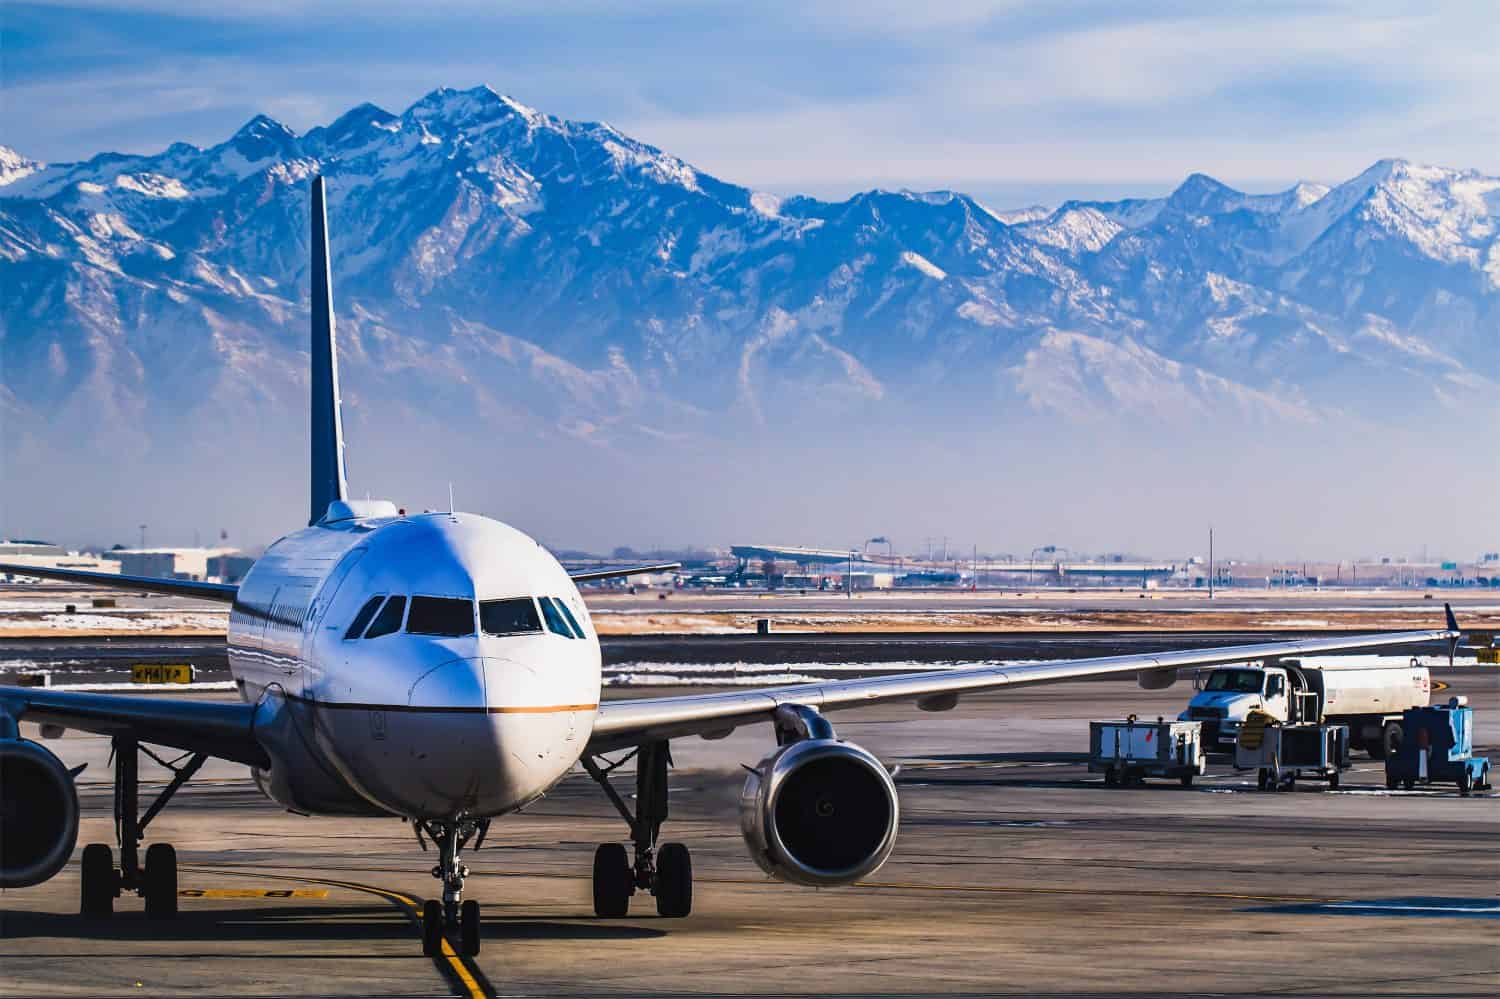 Beautiful view of the snow covered mountains from Salt Lake City whilst in the airport lounge getting ready for departure during winter.